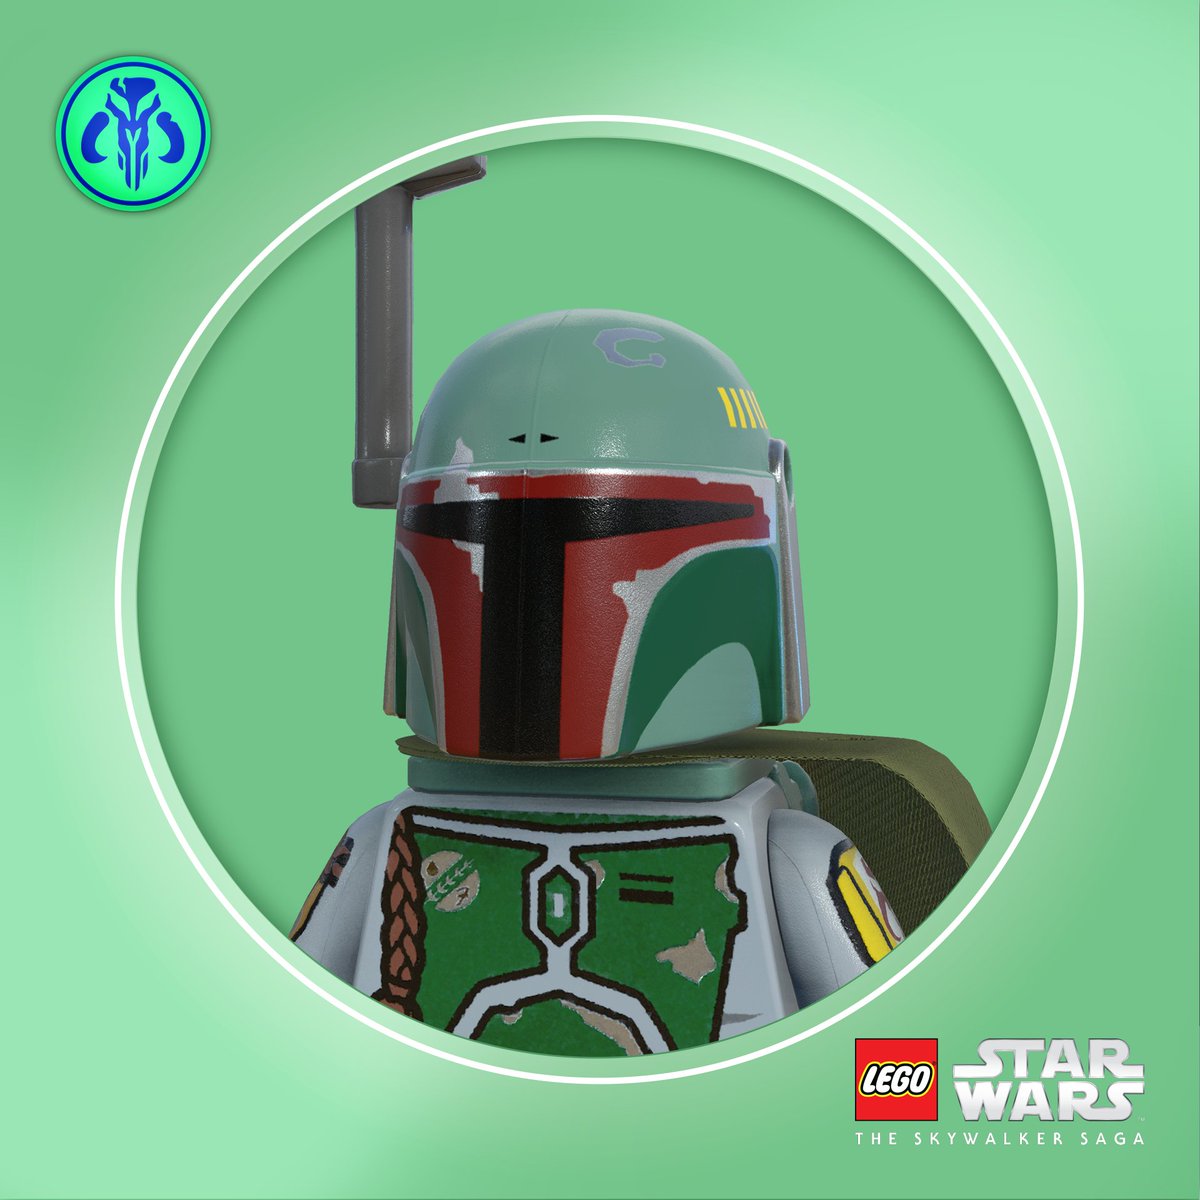 biord sofistikeret ligegyldighed LEGO Star Wars Game on Twitter: "Feel the power of the dark side with this  new batch of profile pics! Come back tomorrow for more characters!  #LEGOStarWarsGame https://t.co/OTTHsS9tin" / Twitter